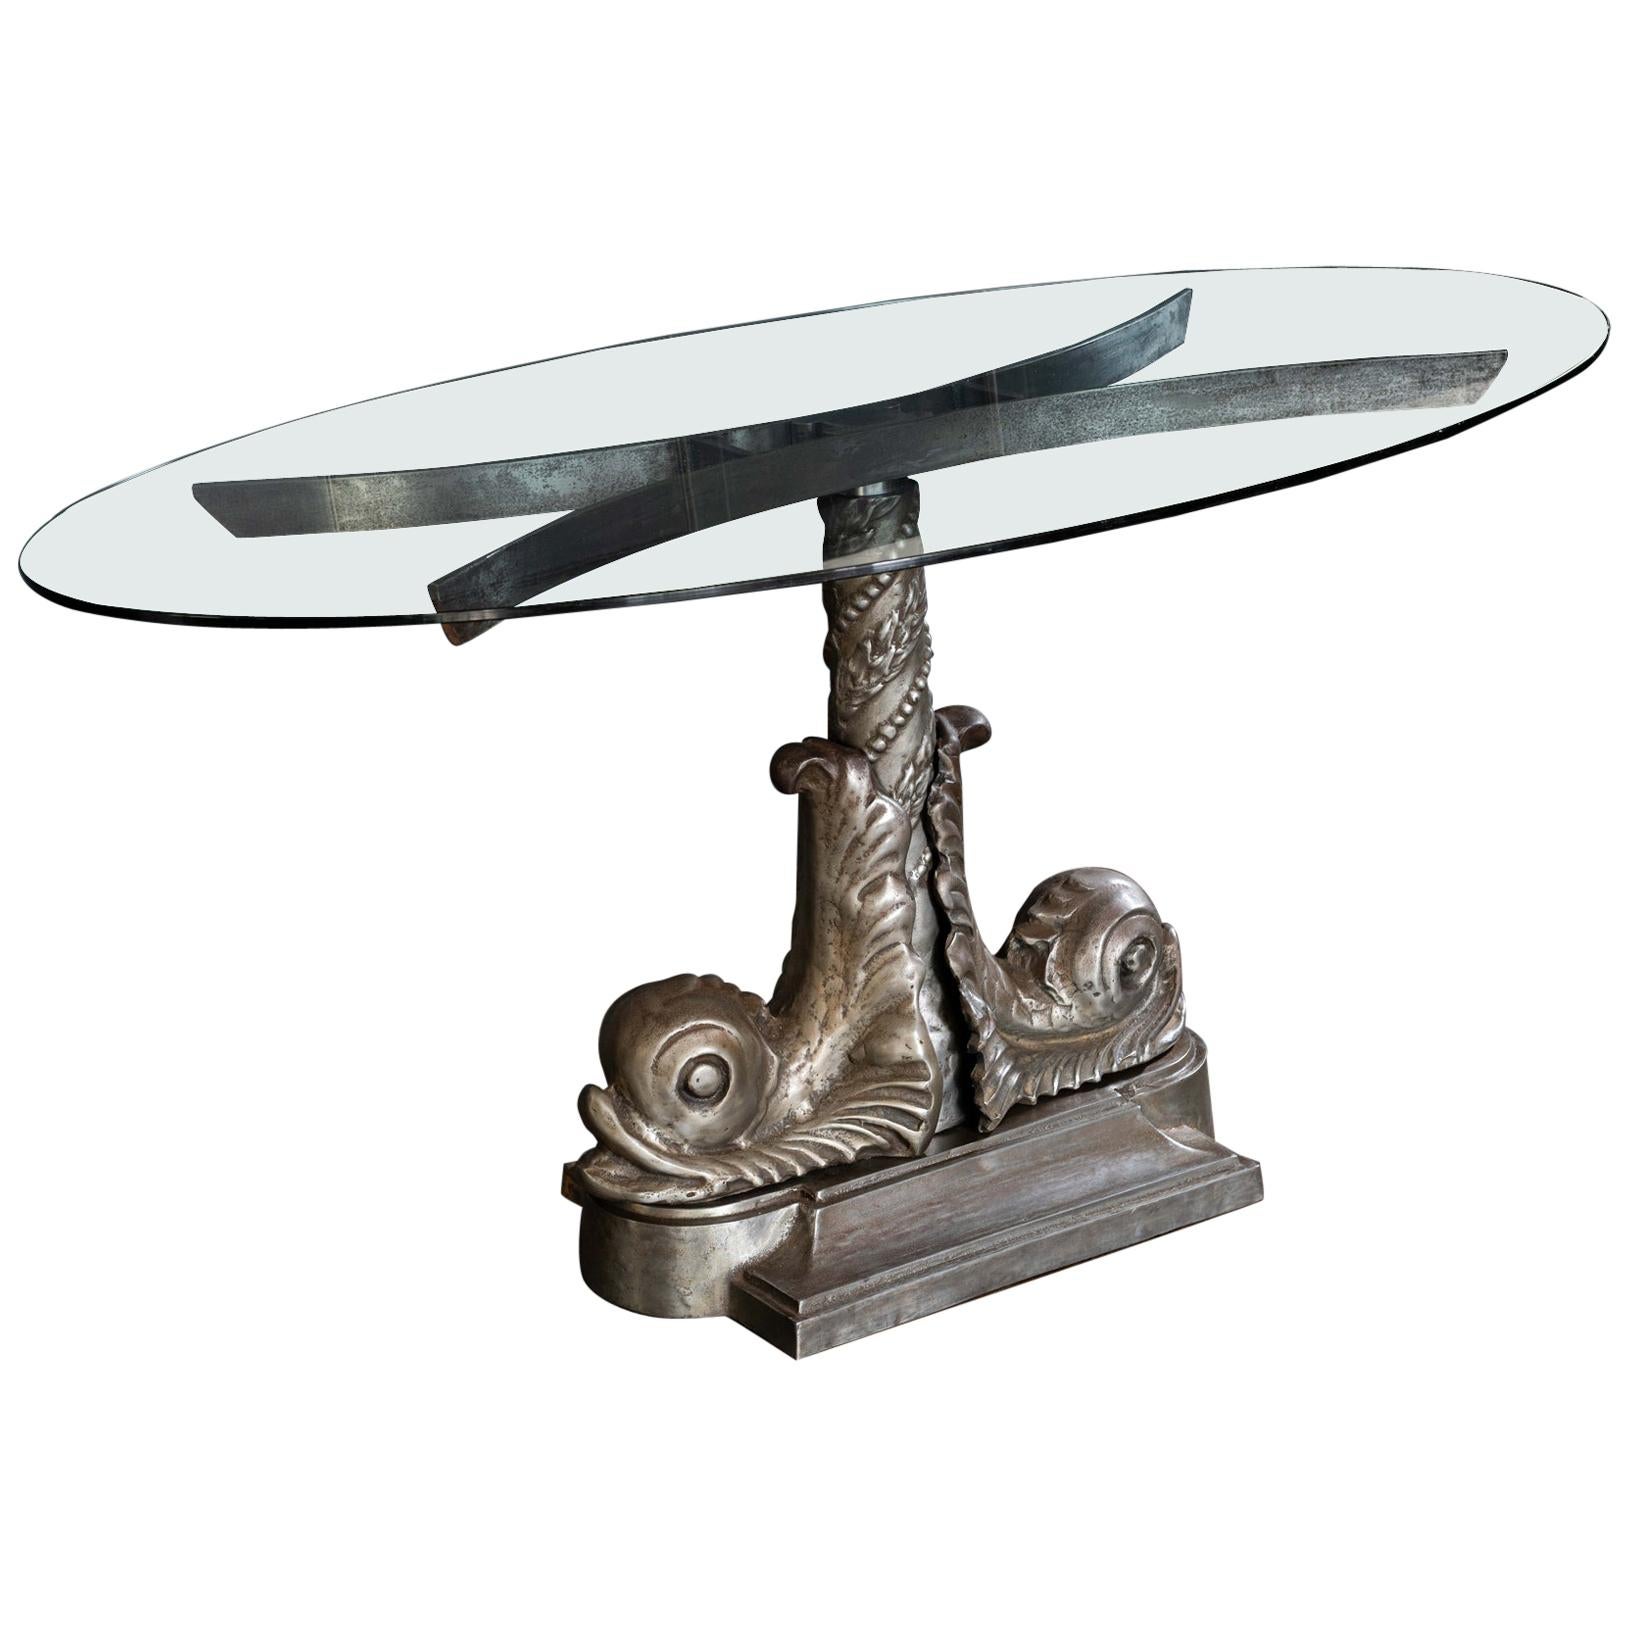 London Embankment Cast Iron Sturgeon Table with Rotating Glass Top, circa 1980s For Sale